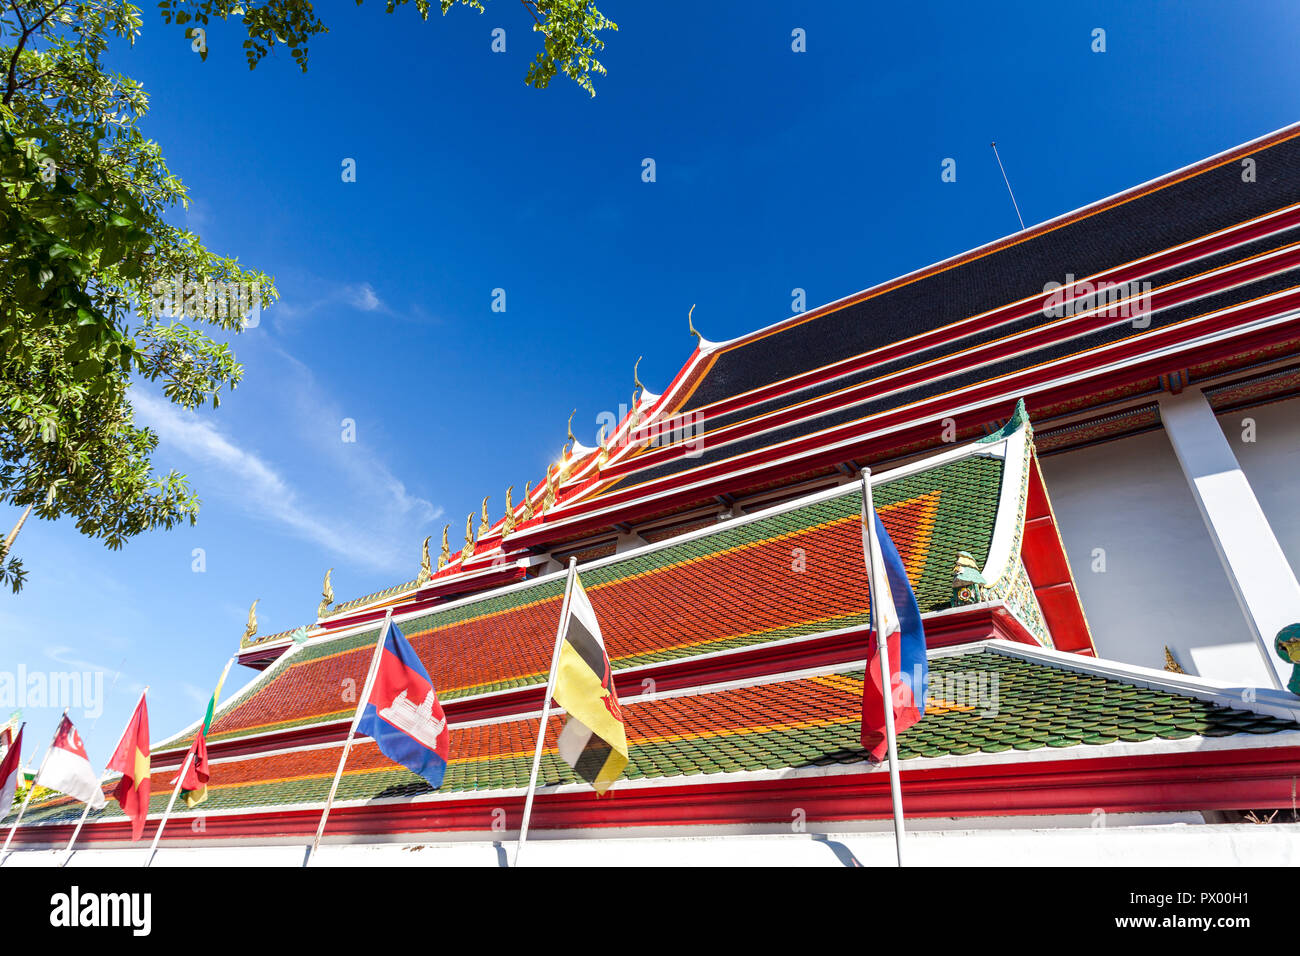 Roof of Wat Pho temple in Bangkok, Thailand Stock Photo